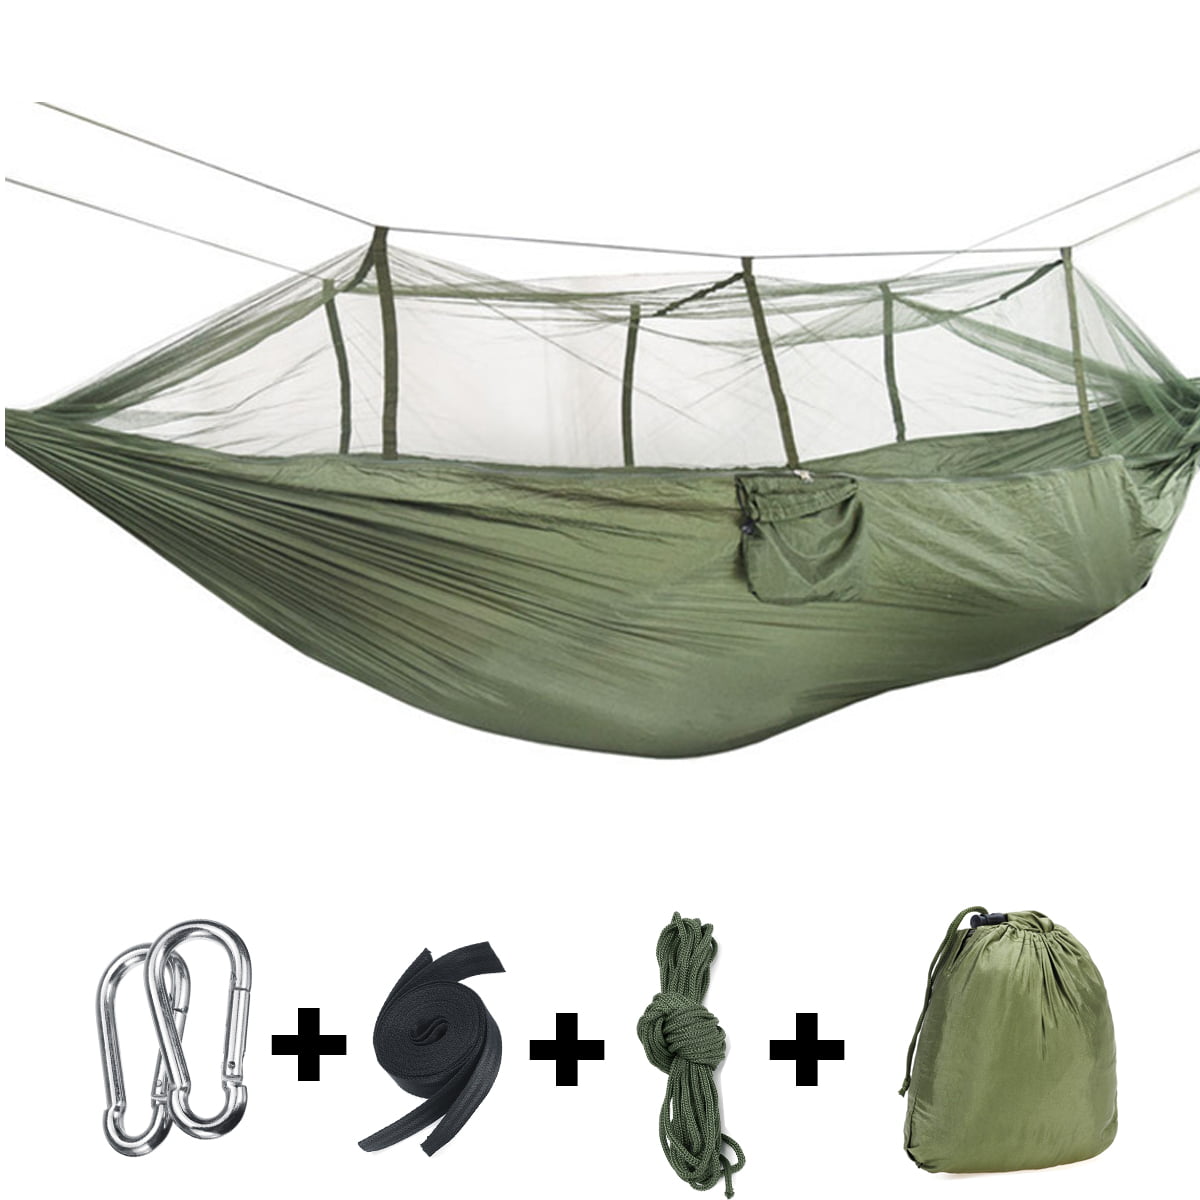 Double Person Nylon Camping Hammocks with Net TOPCHANCES Upgrade Hammock with Mosquito Net Beach Tree Straps & Carabiners for Outdoor Backyard Camping Hiking 